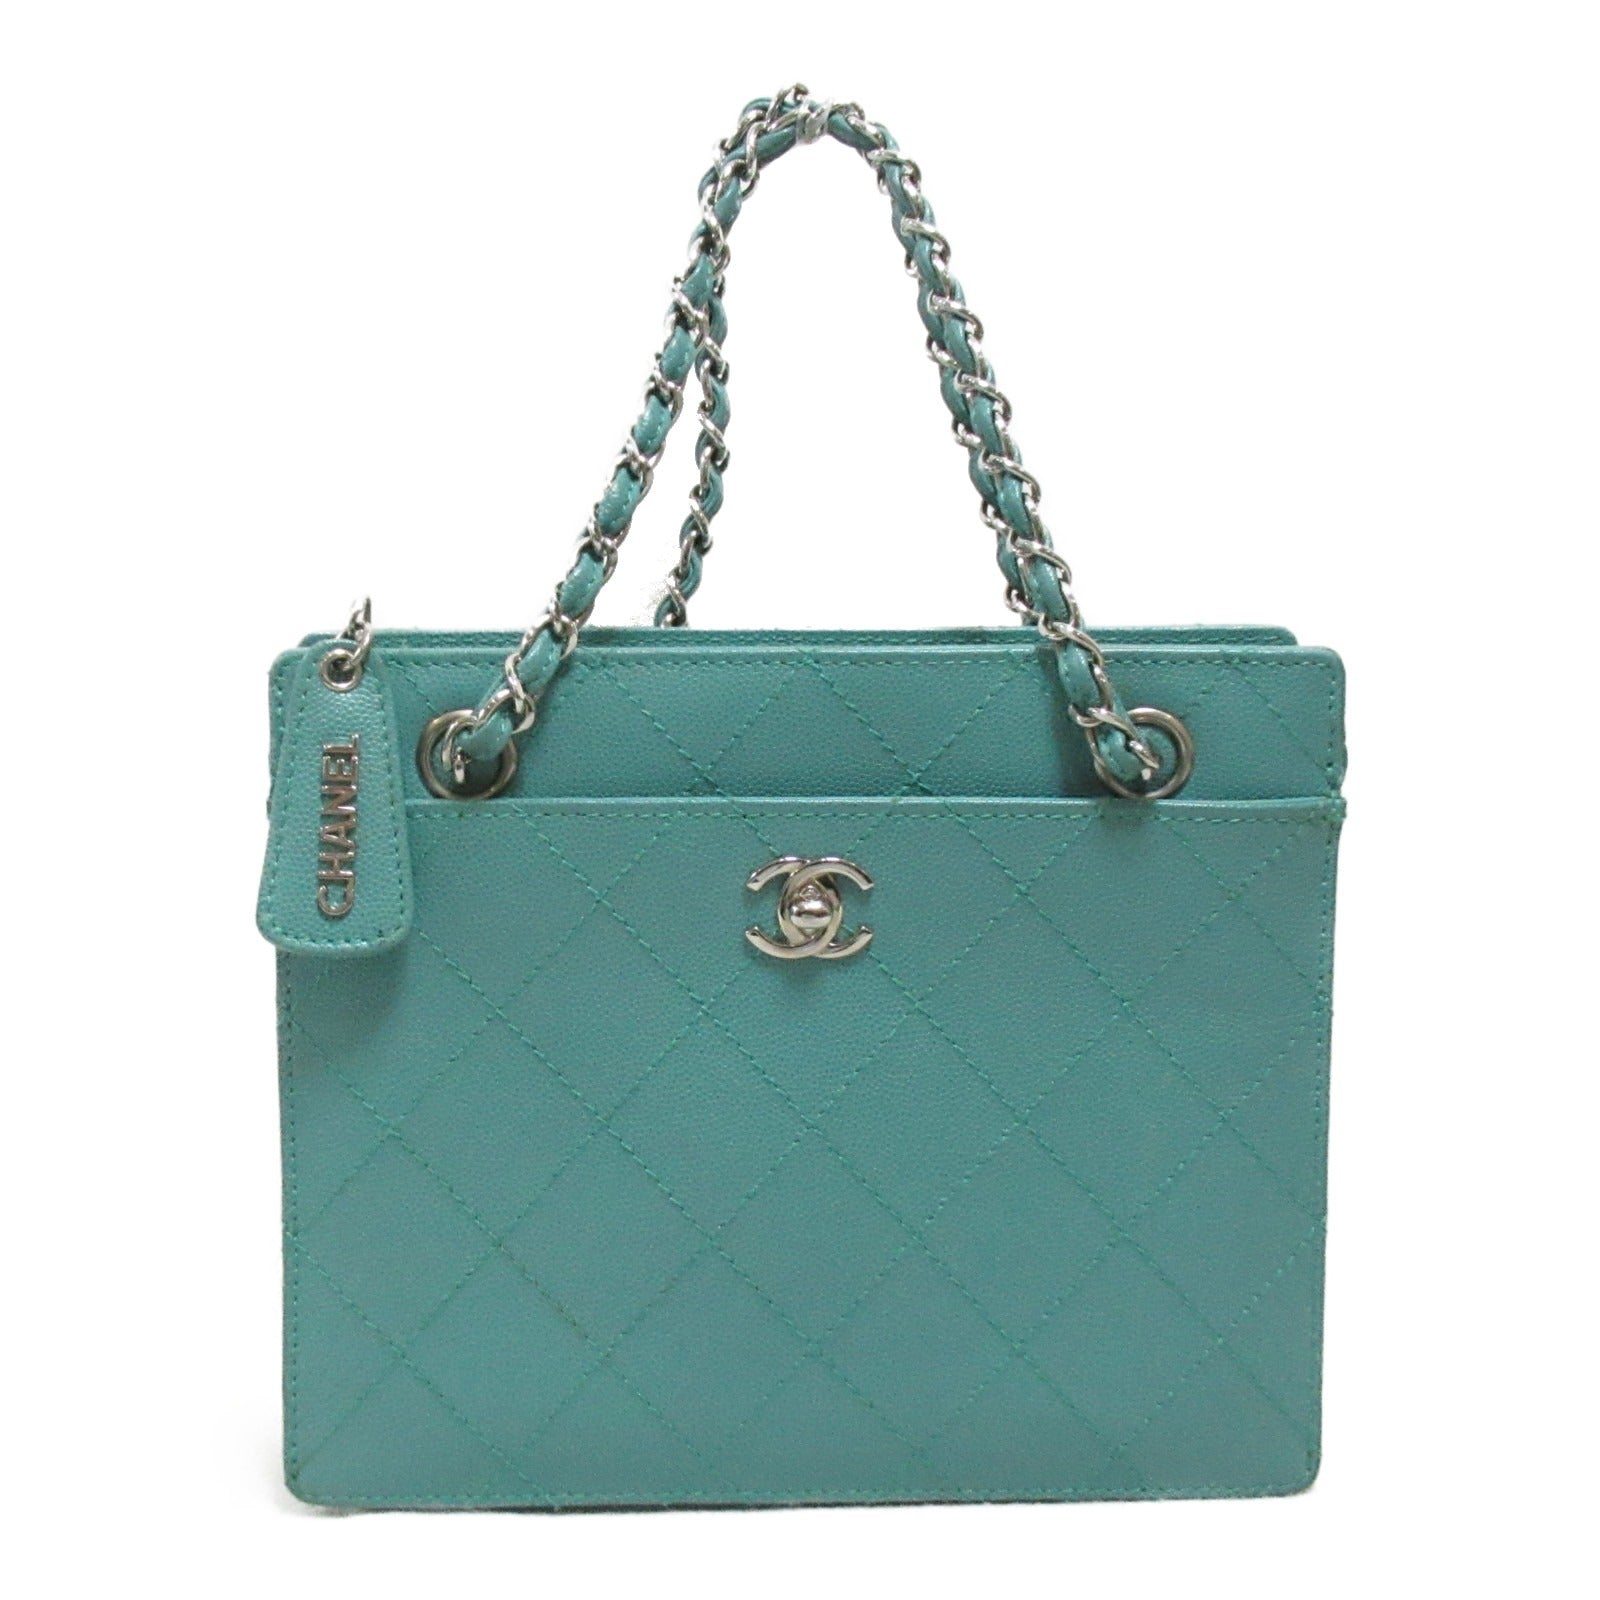 Chanel Chain Handbag Chain Handbag Chain Handbag Cabia S (Green )  Green Turquoise